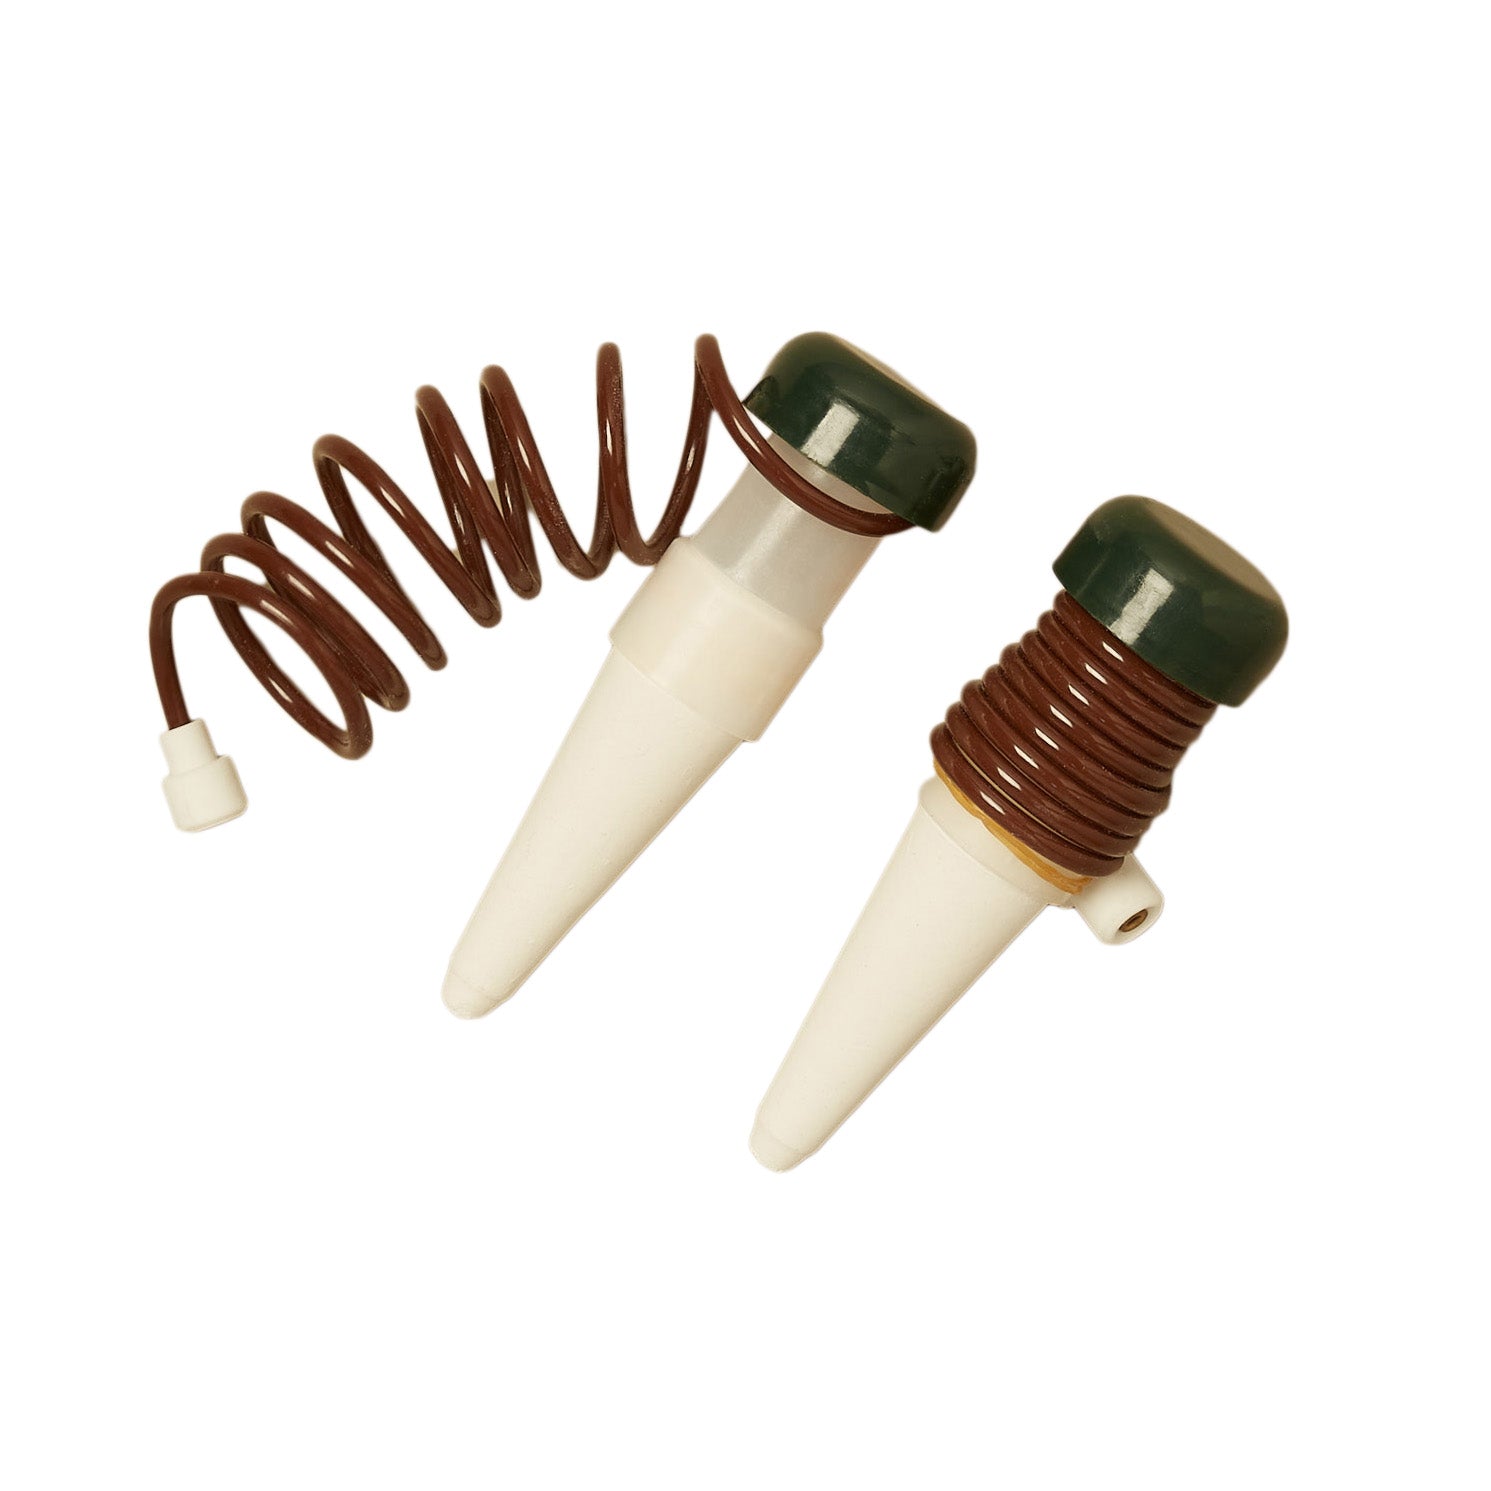 A pair of brown and white syringes on a white background in one of the best plant nurseries near me.